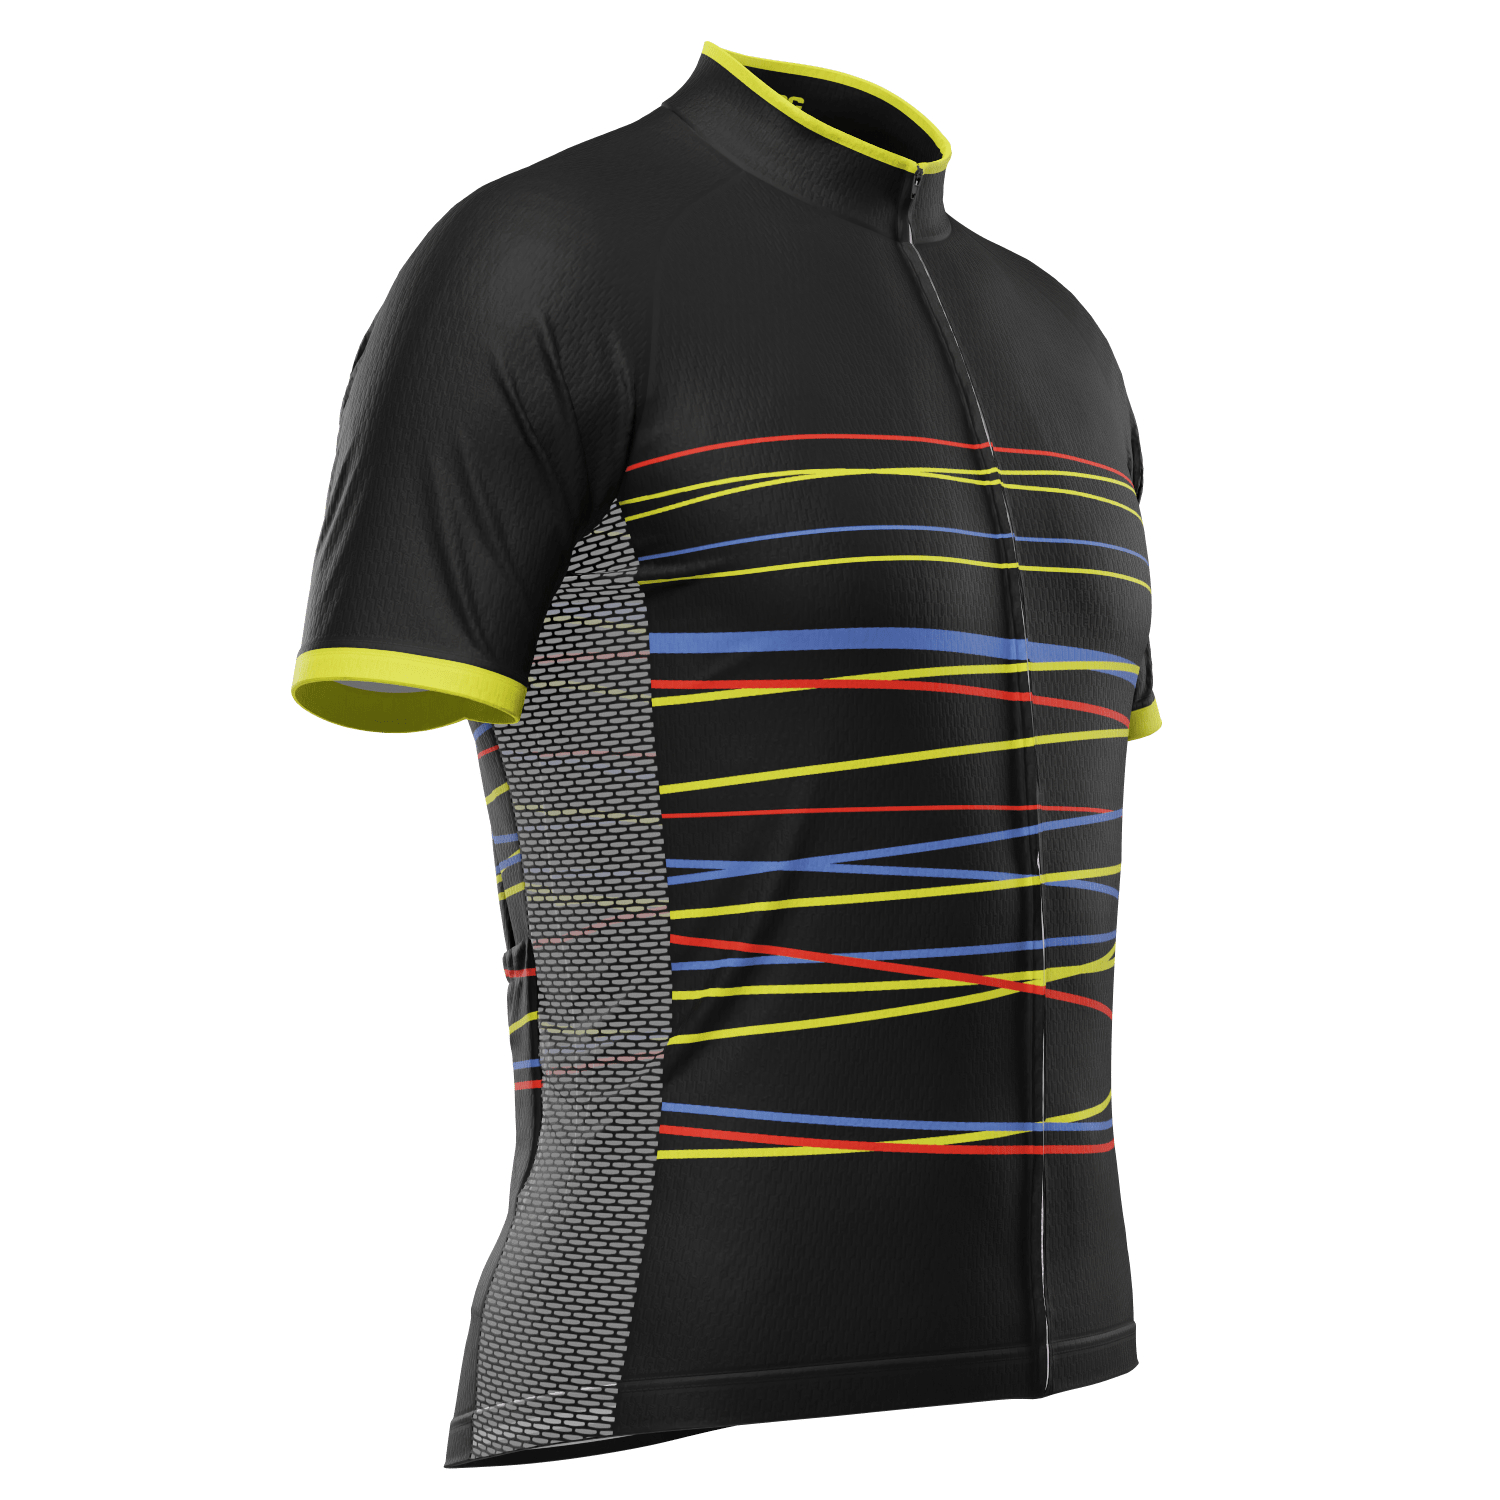 Men's Zigzag Color Lines Short Sleeve Cycling Jersey